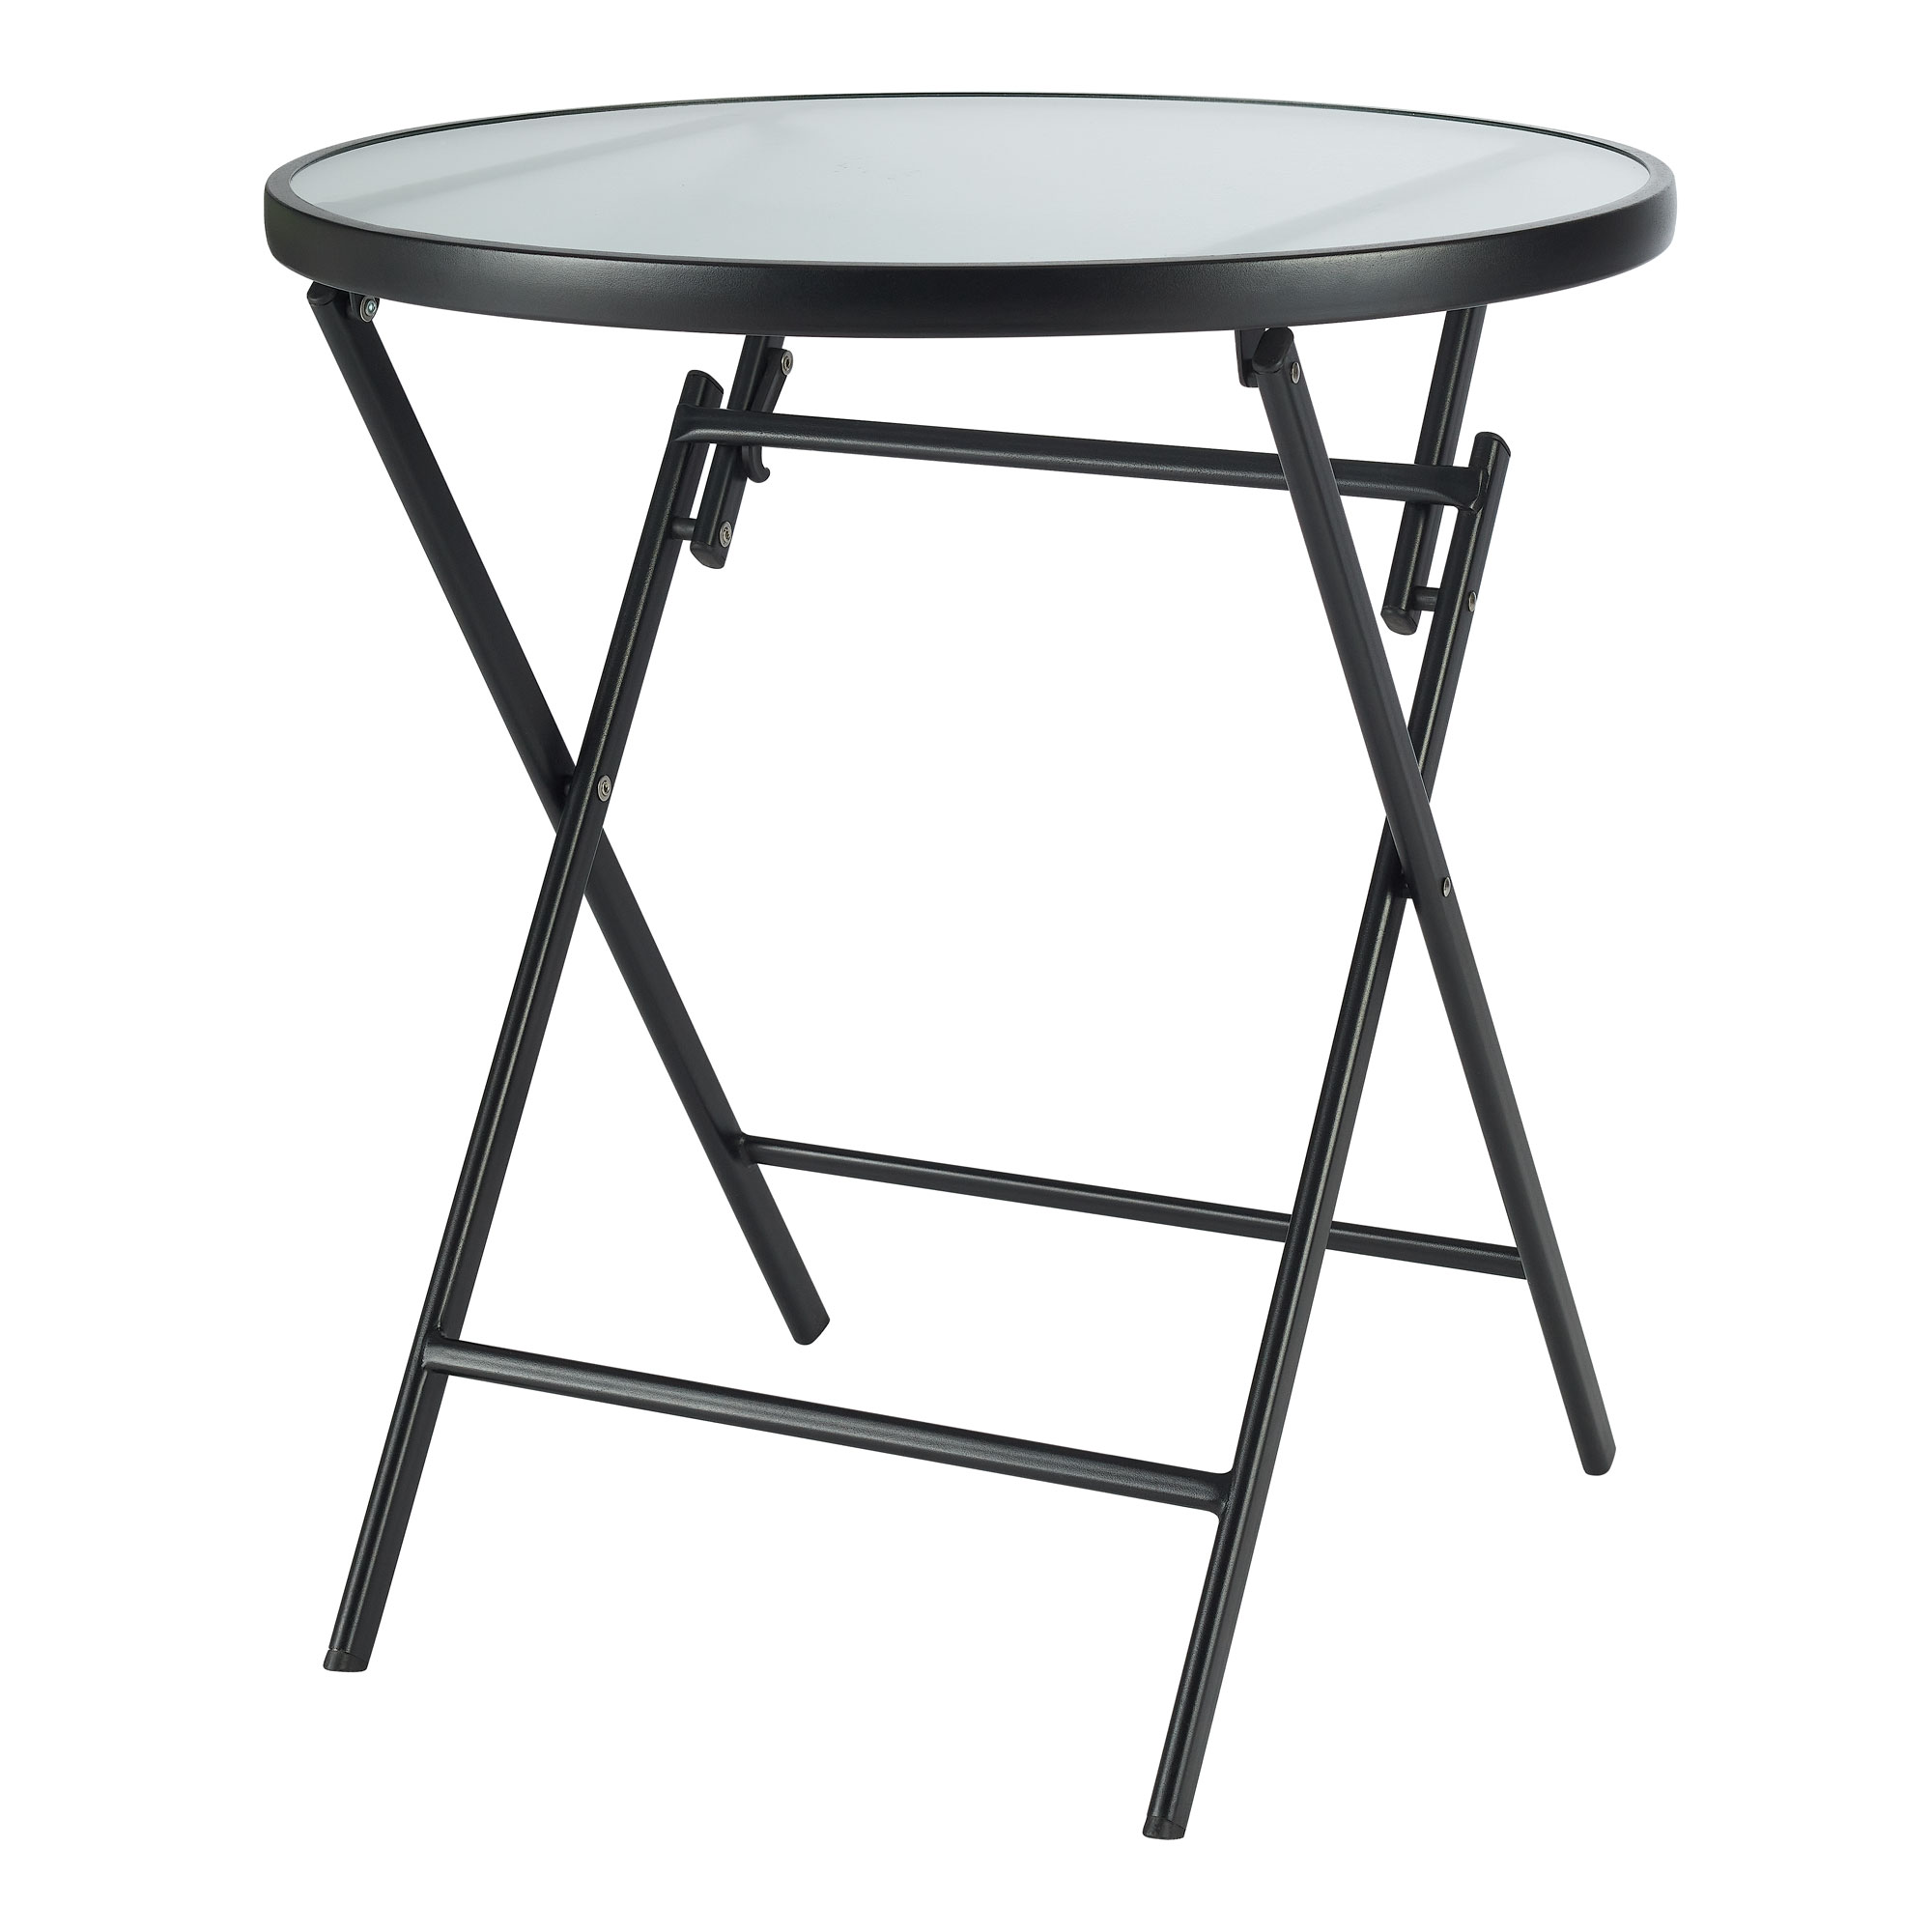 Mainstays 26" Greyson Square Glass and Steel Round Bistro Folding Table - White Linen - image 2 of 6